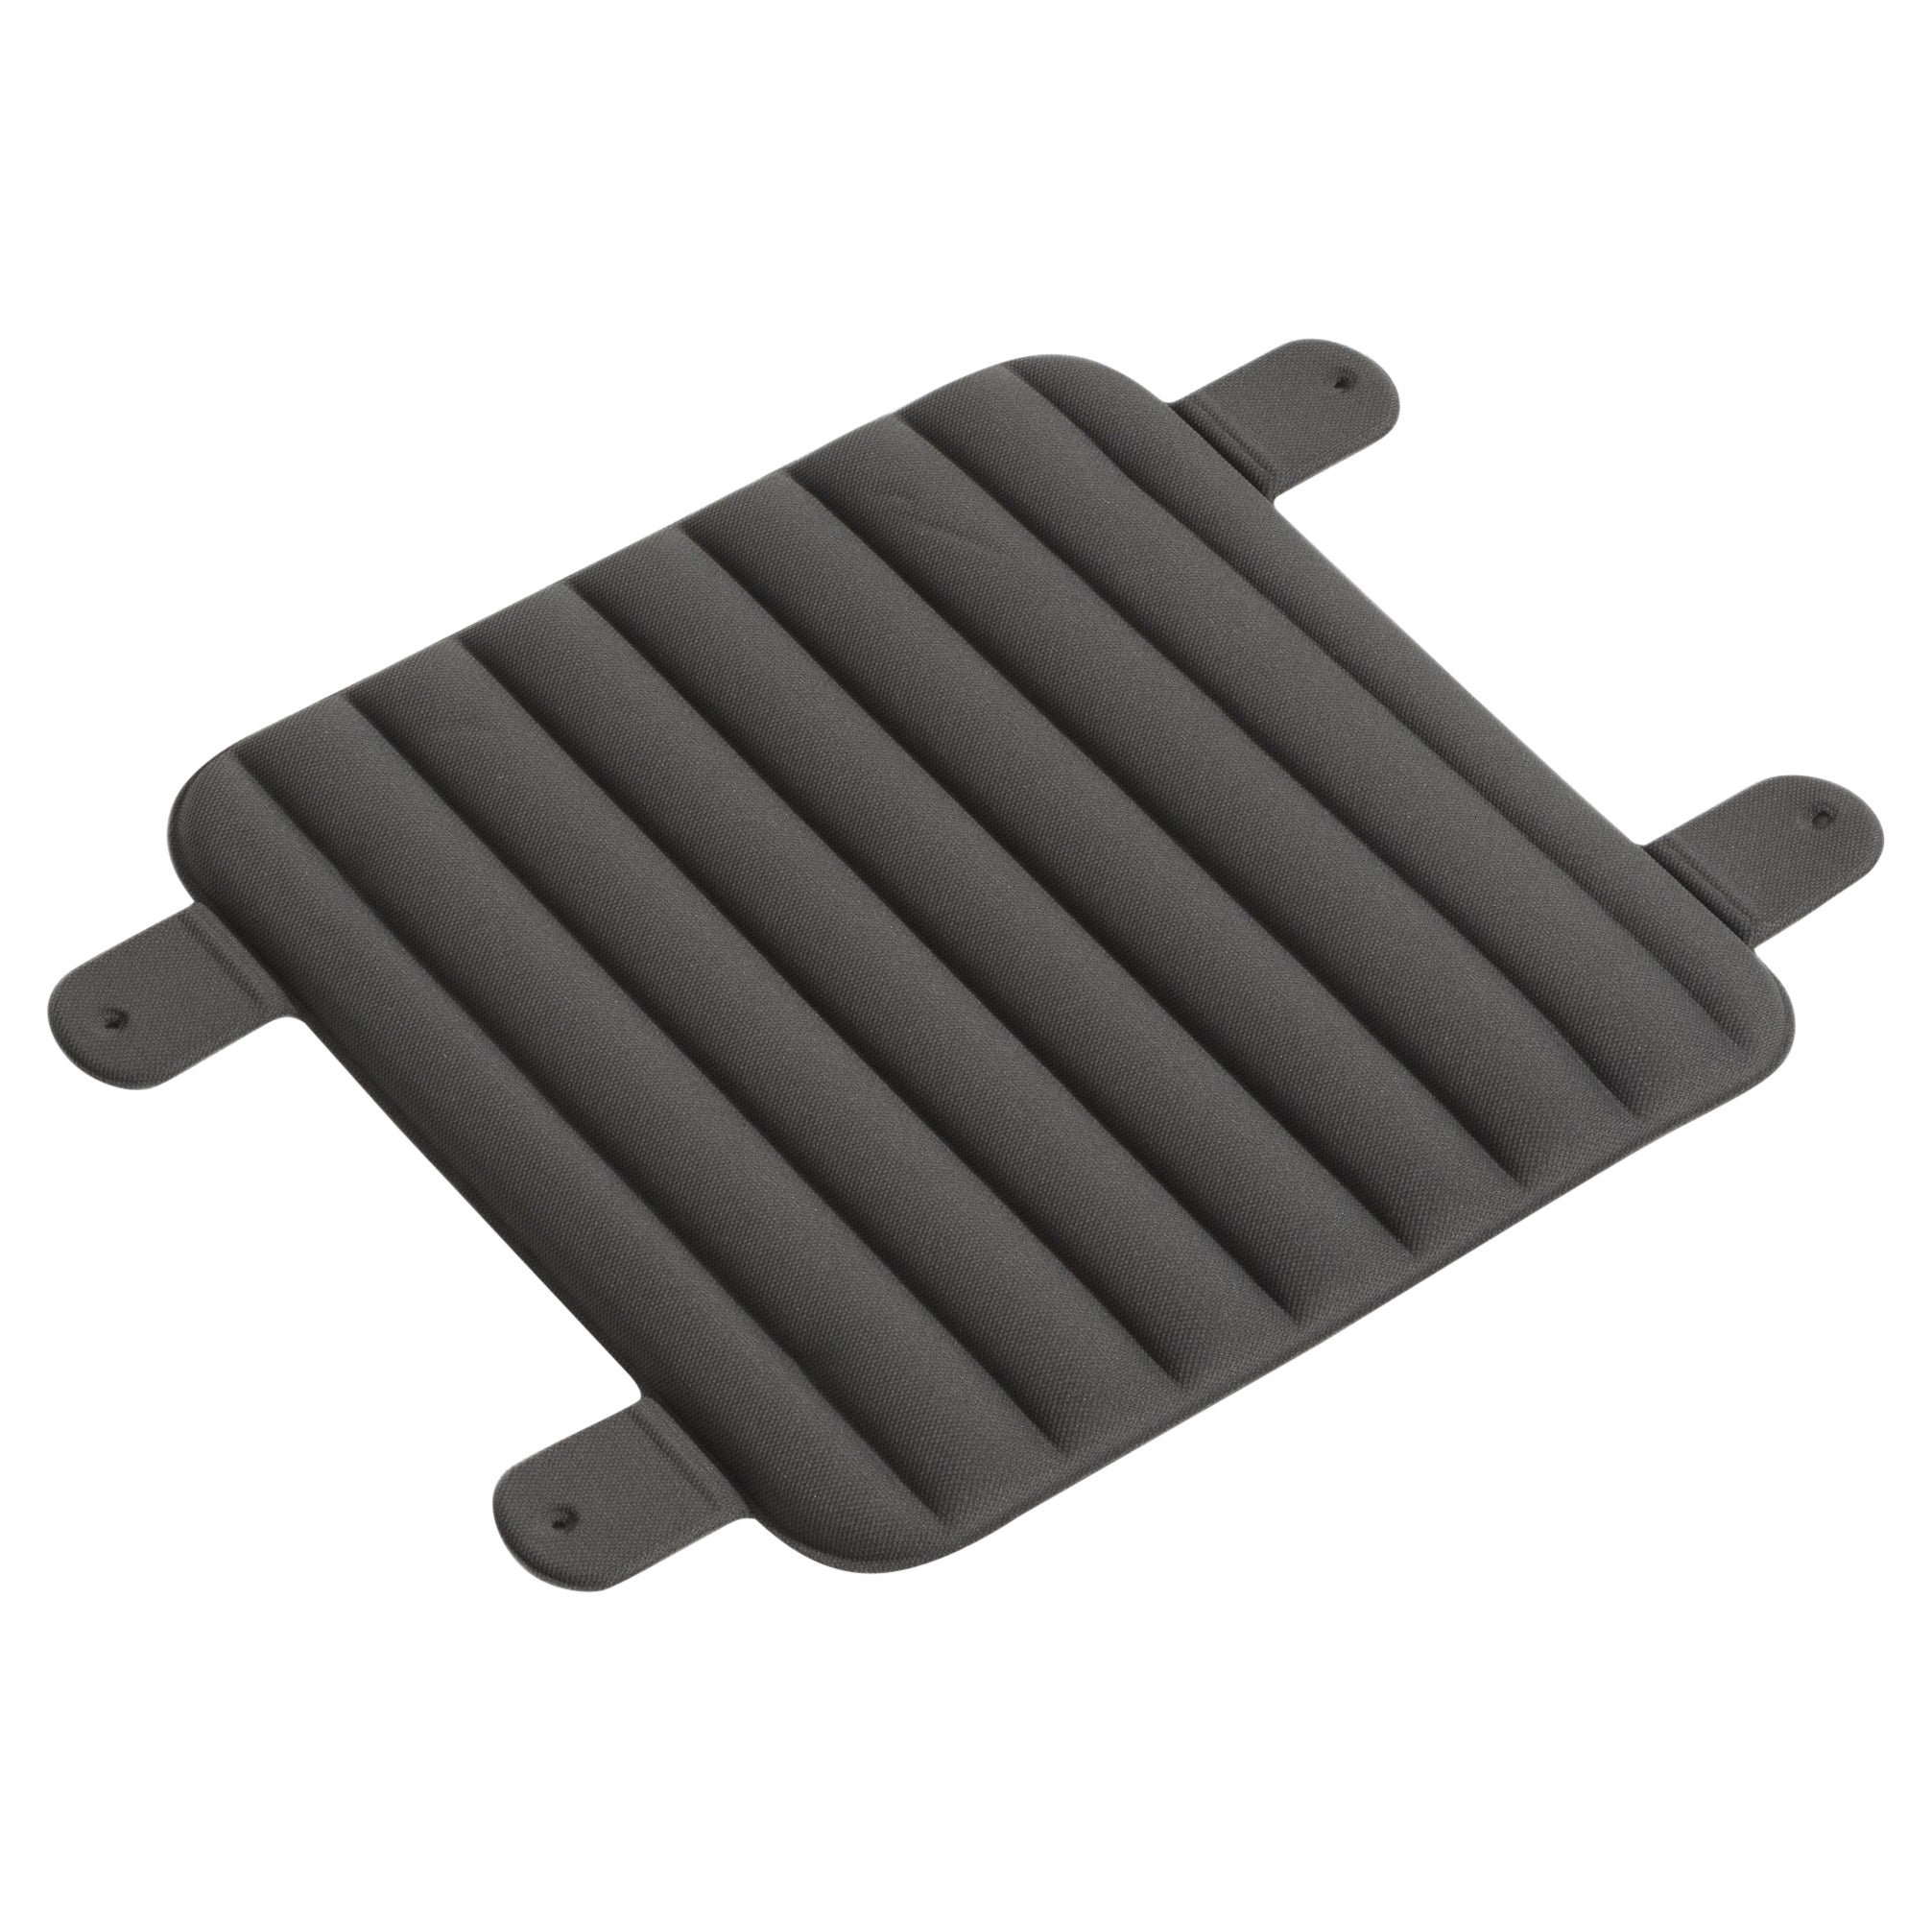 Petite Friture Week-End Samll Seat Cushions in Anthracite, 2019